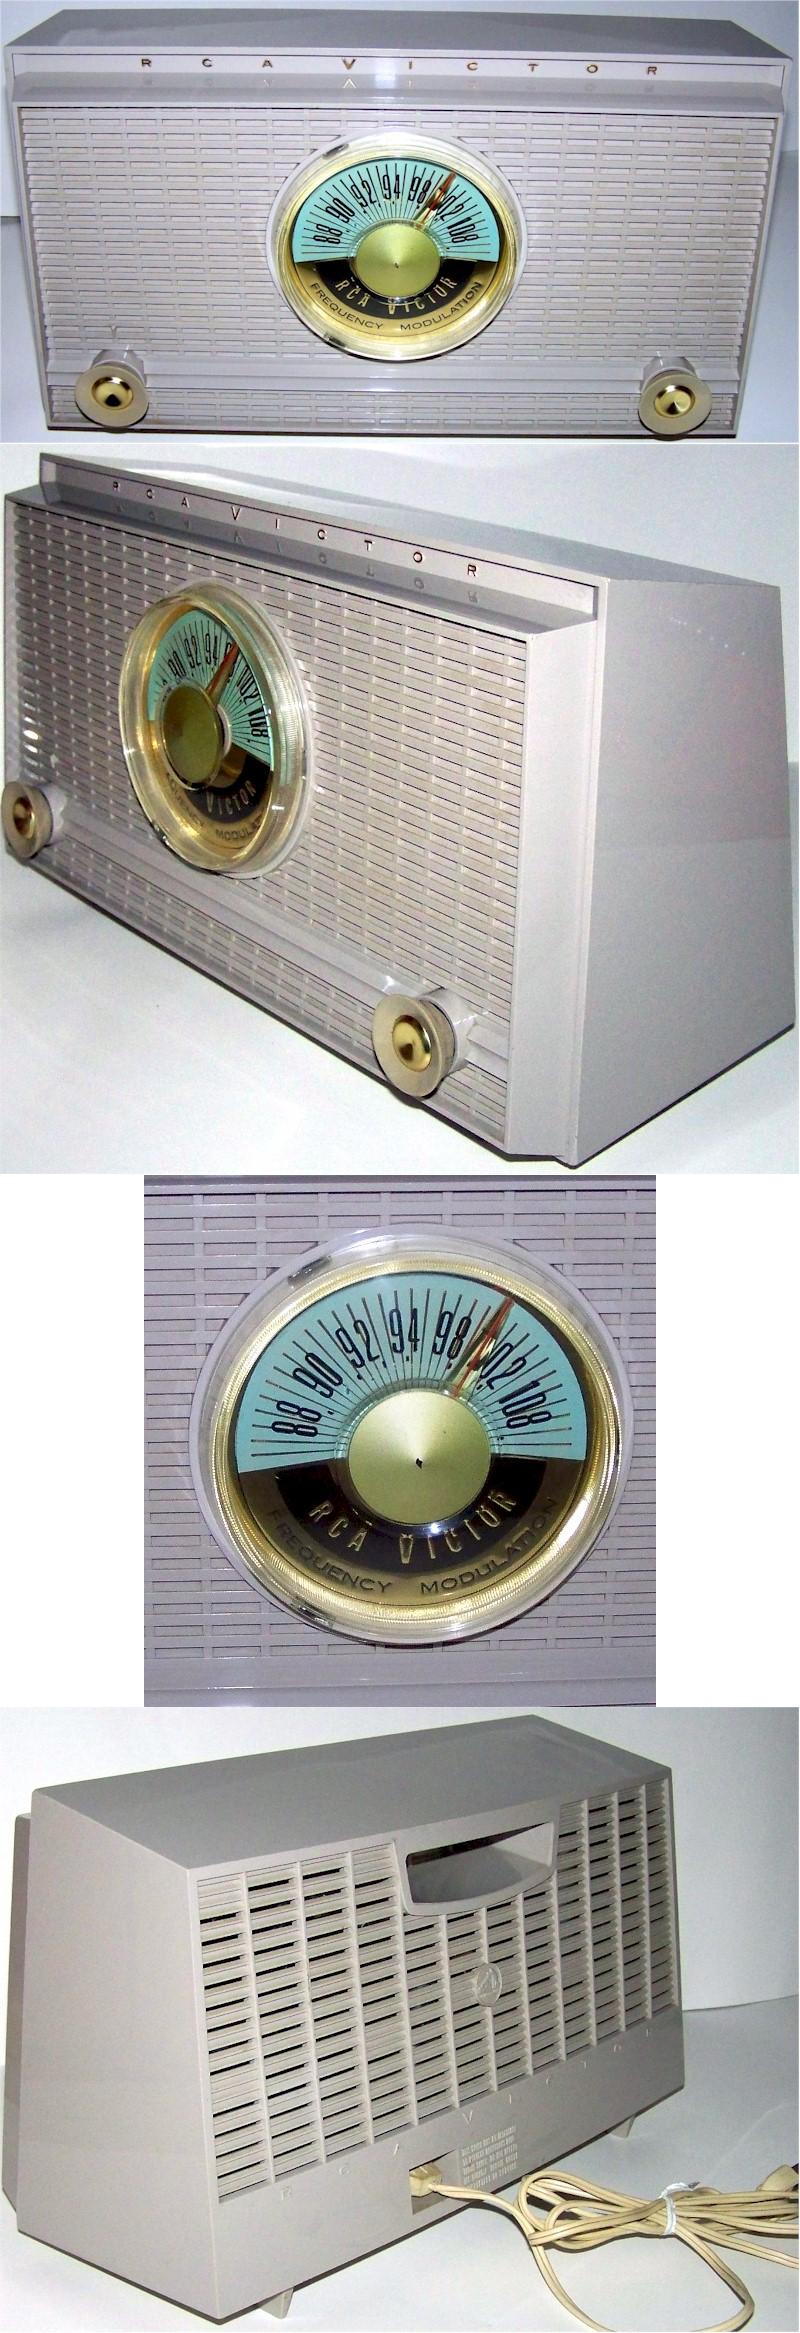 RCA 1-F-1 FM Only (1960)